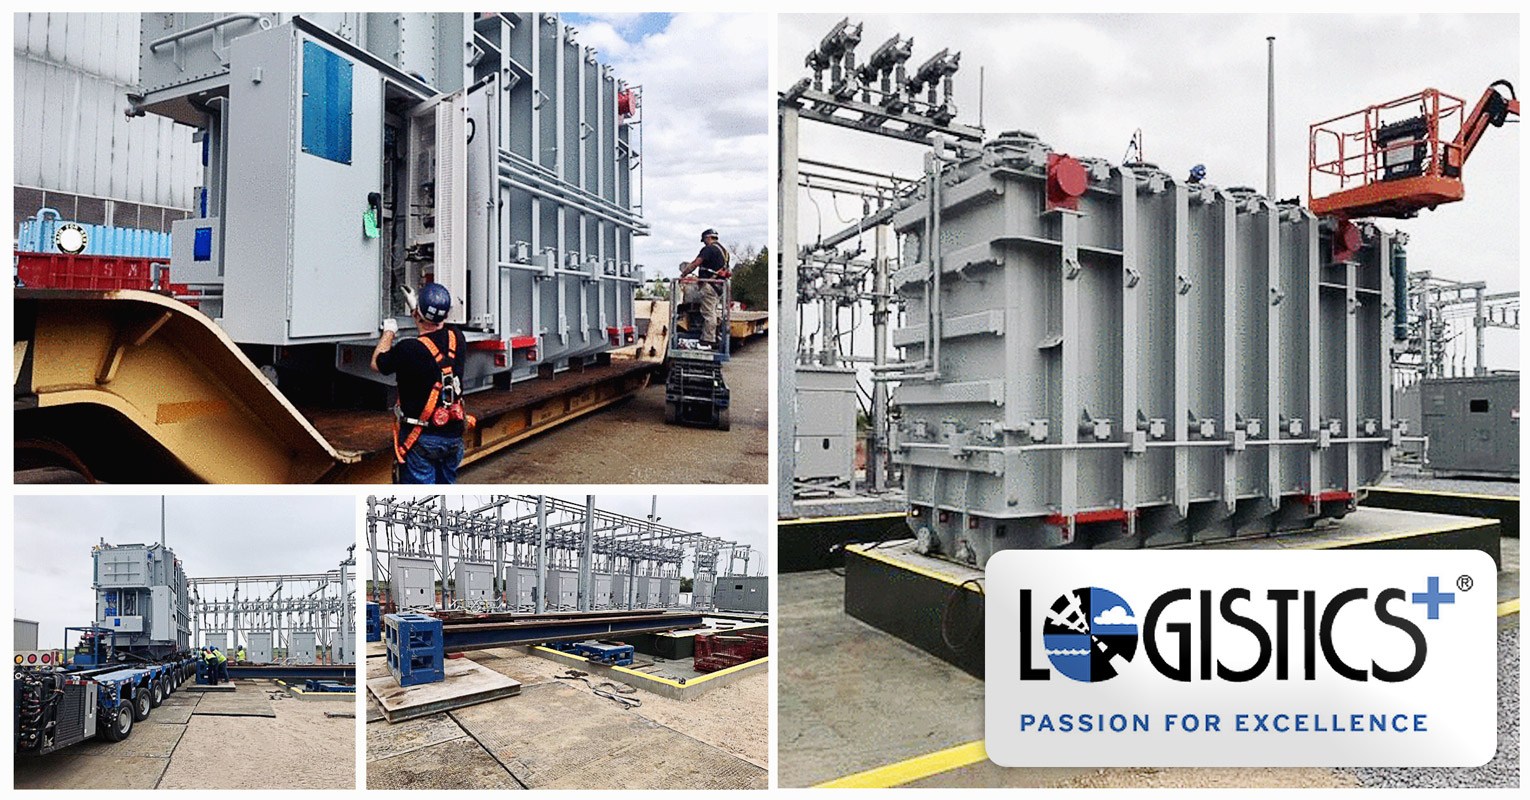 Logistics Plus Recently Completed the Successful Delivery of a 325,000 Pound Transformer to a Wind Farm in Texas